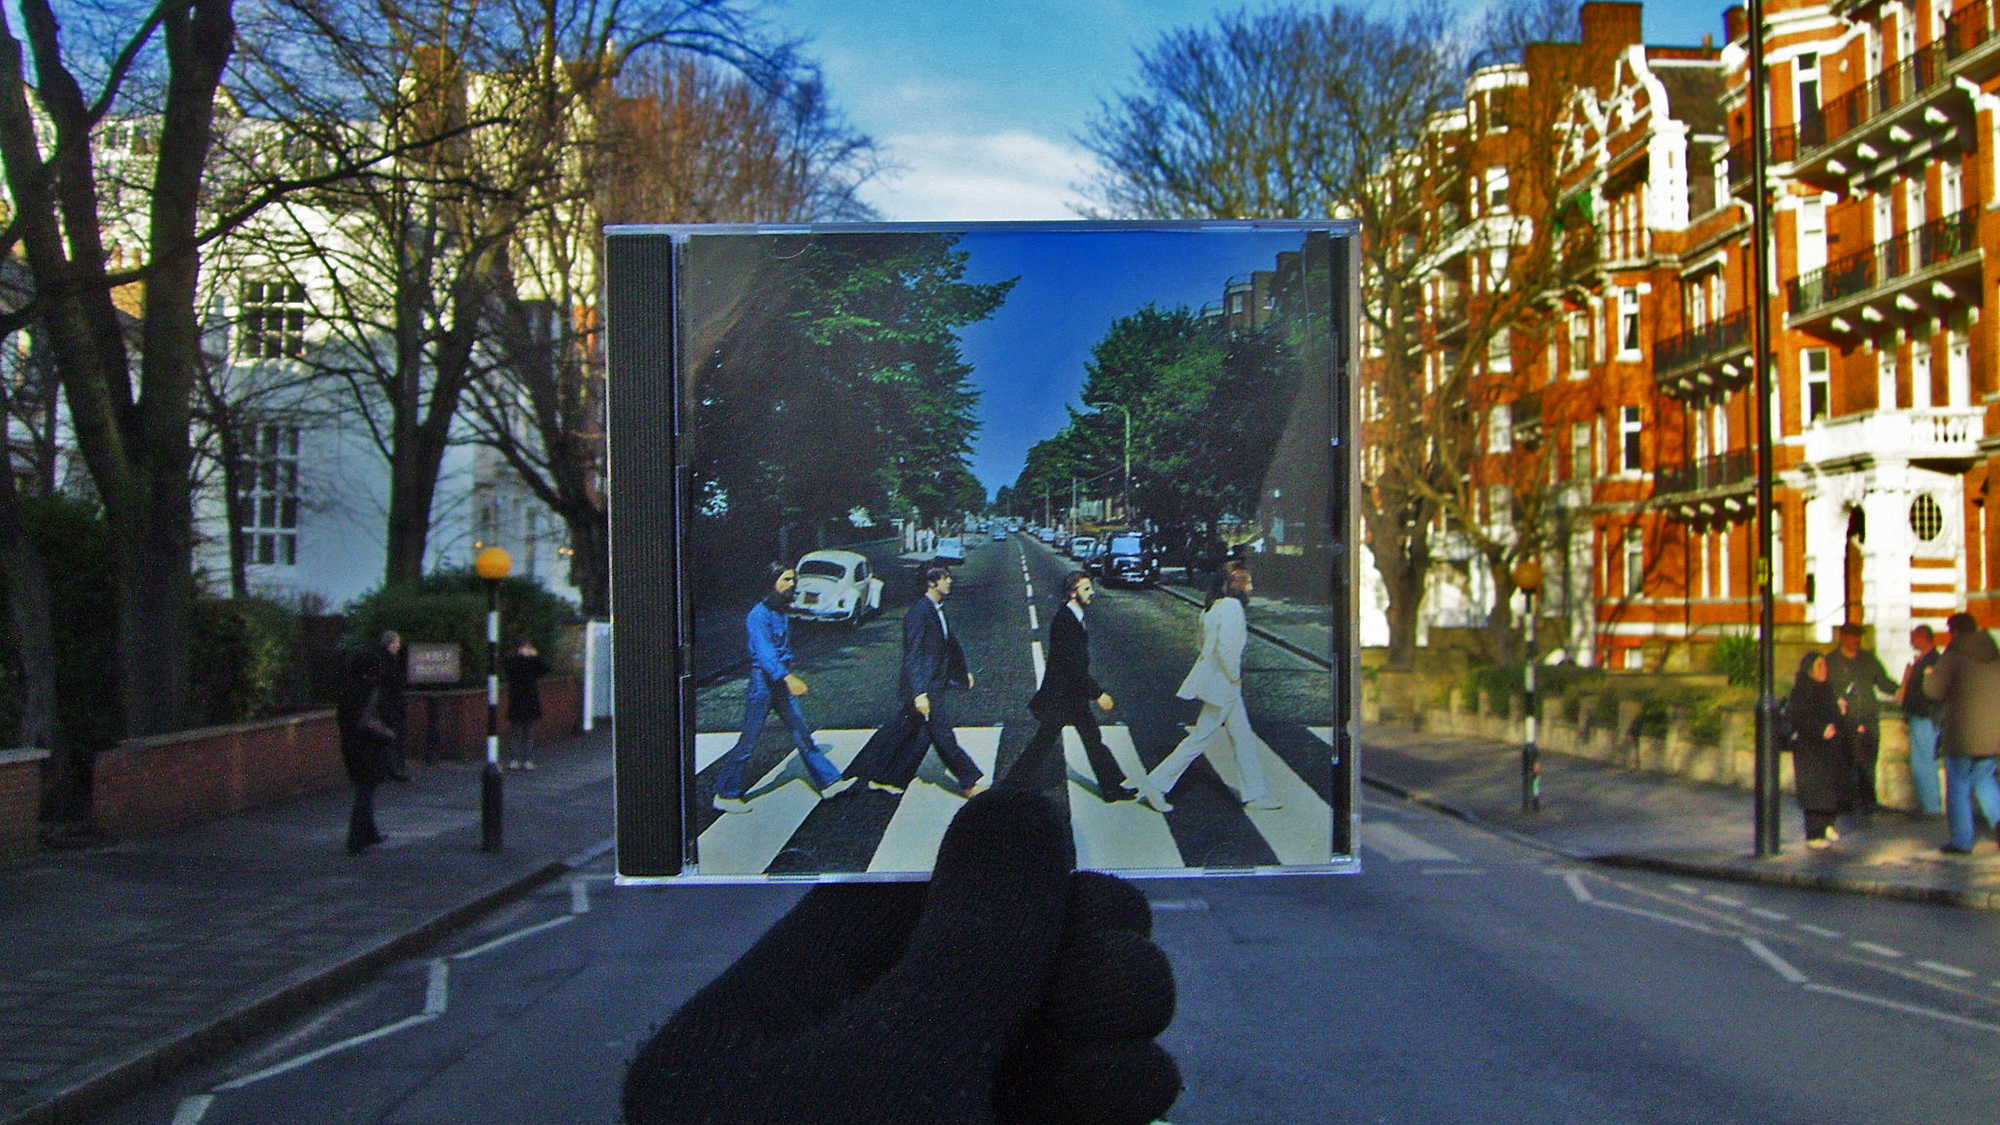 The famous zebra crossing near Abbey Road Studios and the Beatles Album cover "Abbey Road" which immortalised the street.